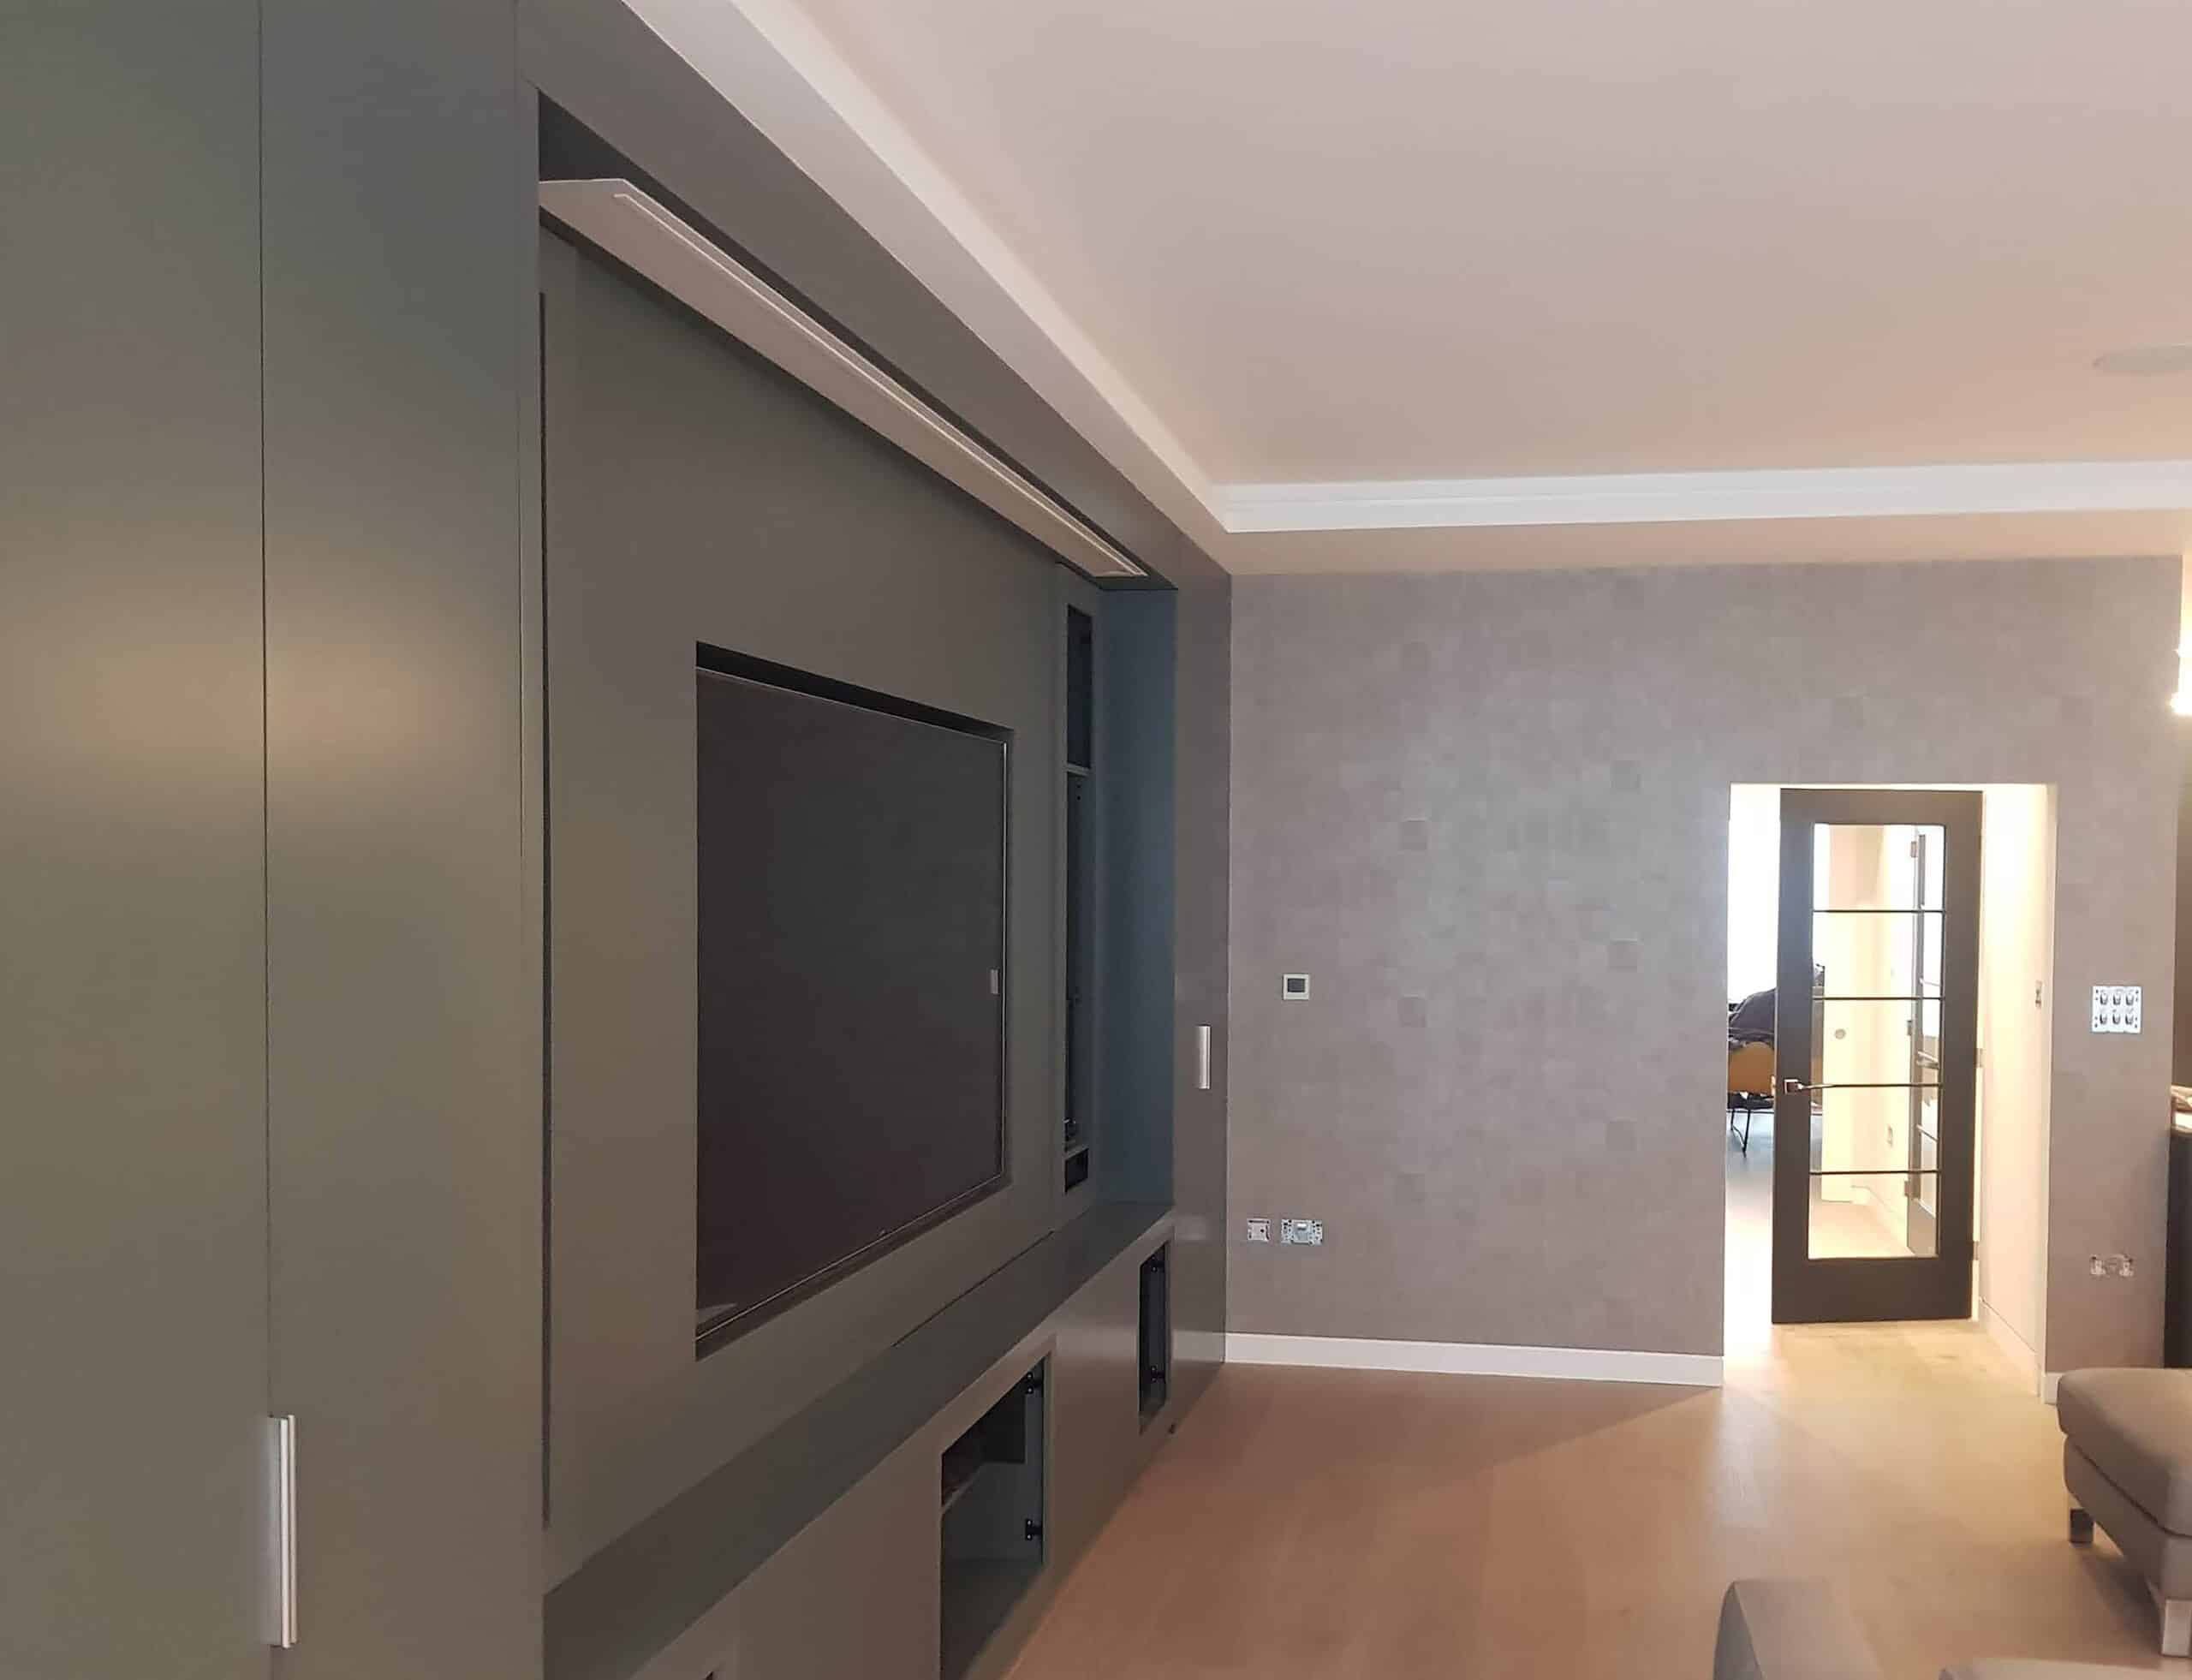 Armani Casa Designer wallpaper professionally installed by Bluespec Decorating Limited wallpaper hangers. There is wall tv unit on left in dark grey.